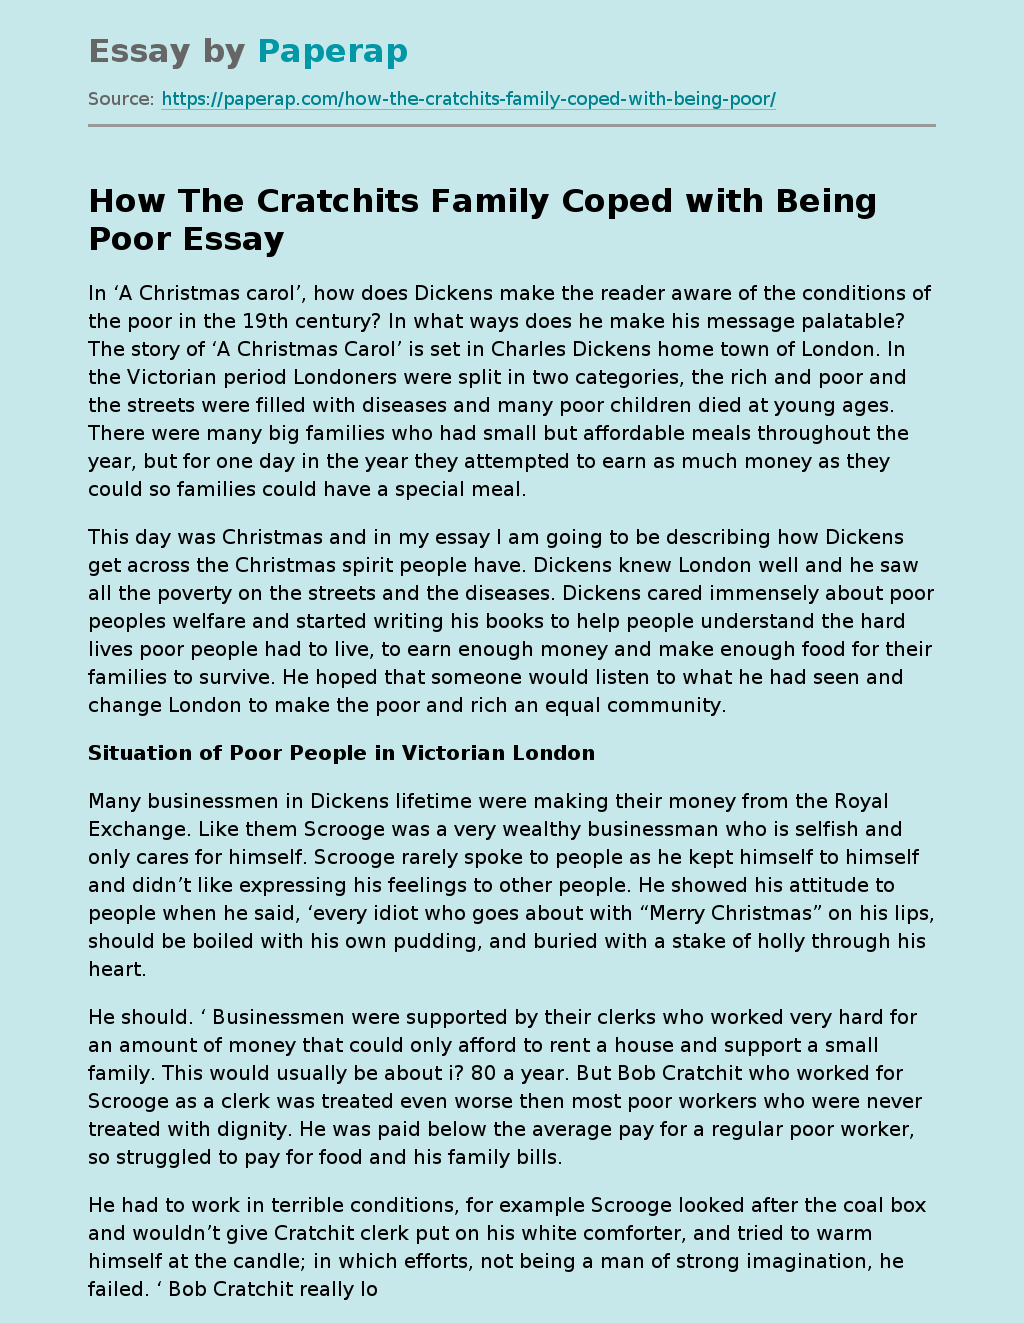 How The Cratchits Family Coped with Being Poor